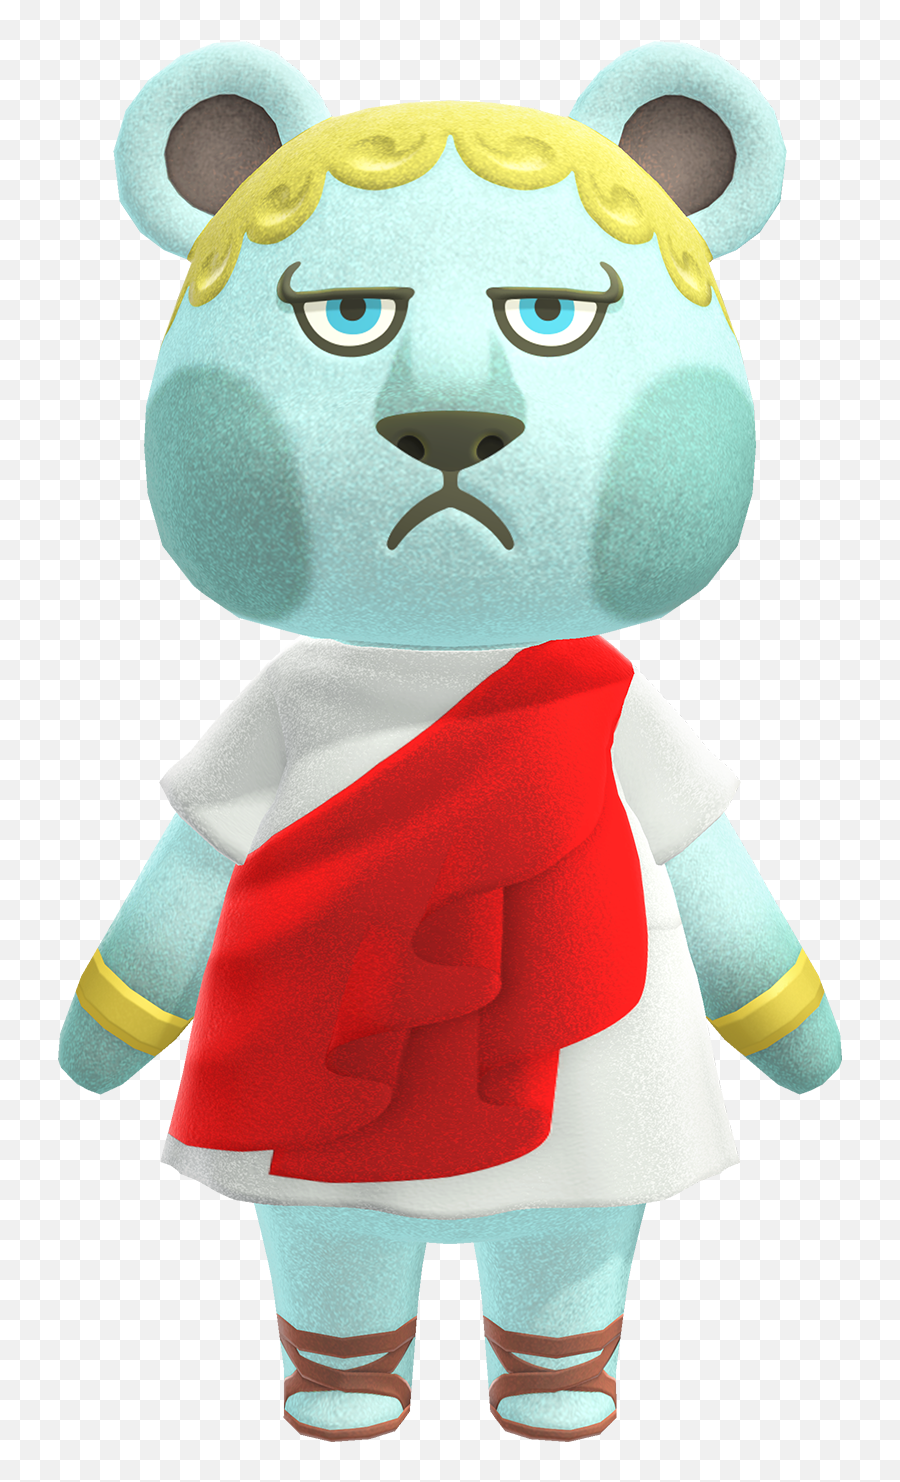 Animal Crossing New Horizons Villagers By Picture 1 Quiz - Animal Crossing Claus Emoji,Animal Crossing Villager Emoticon